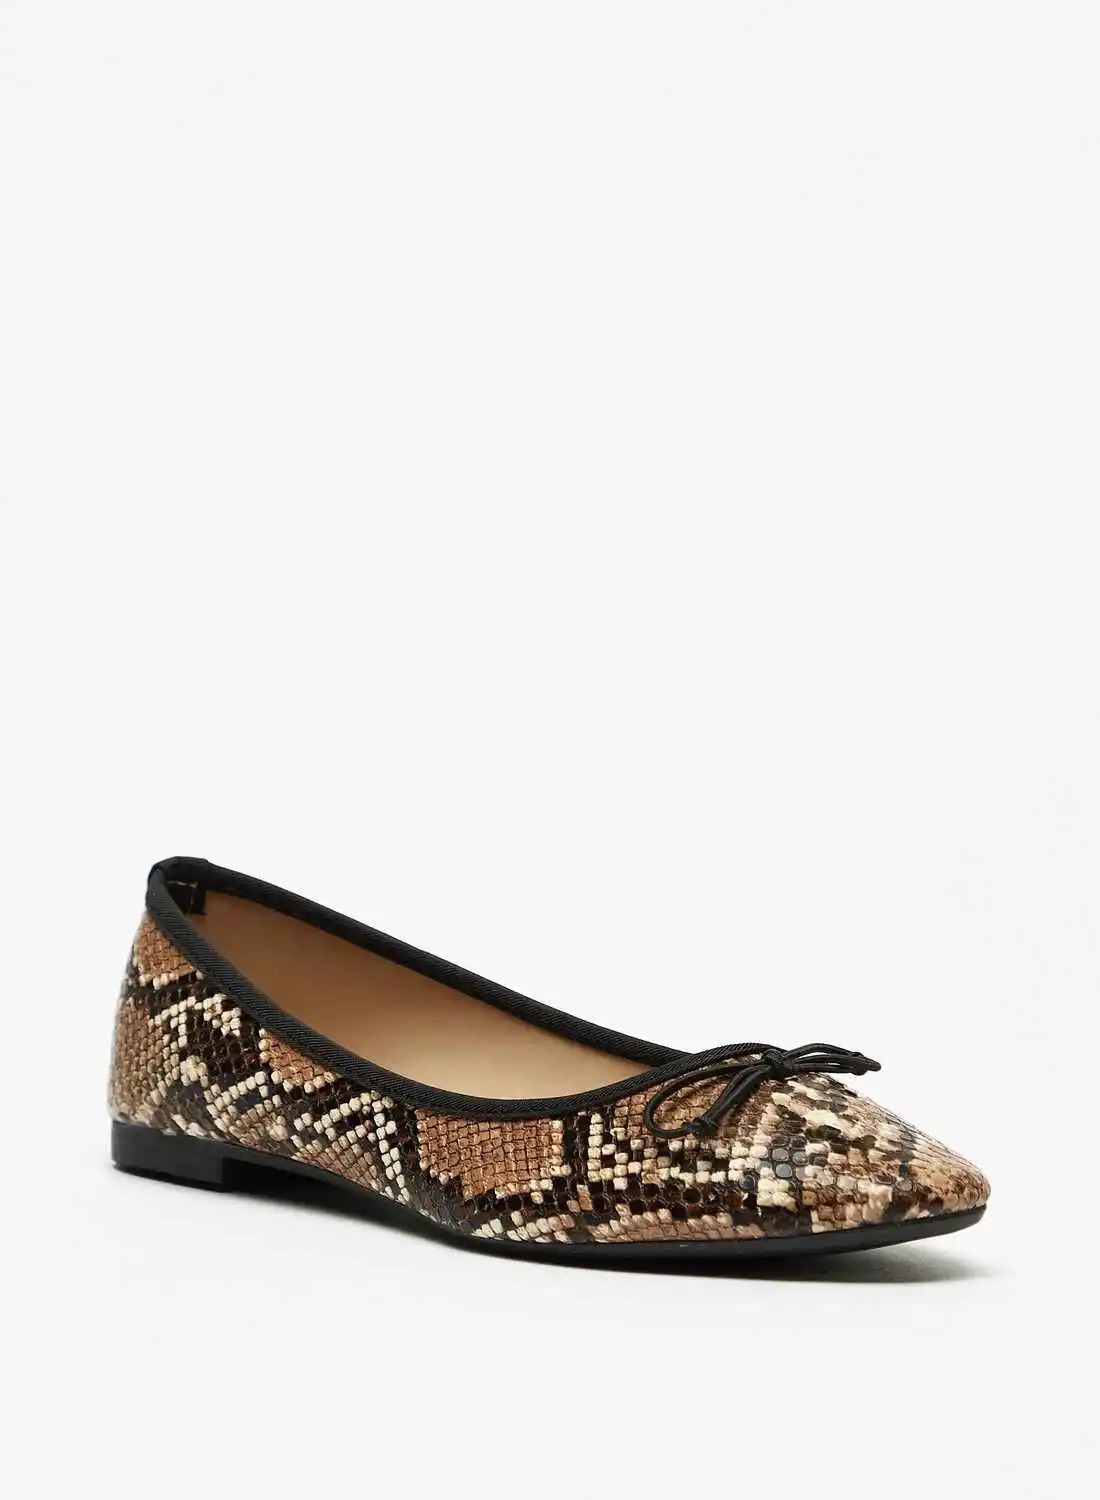 Flora Bella Animal Print Round Toe Slip On Ballerina Shoes with Bow Accent Brown